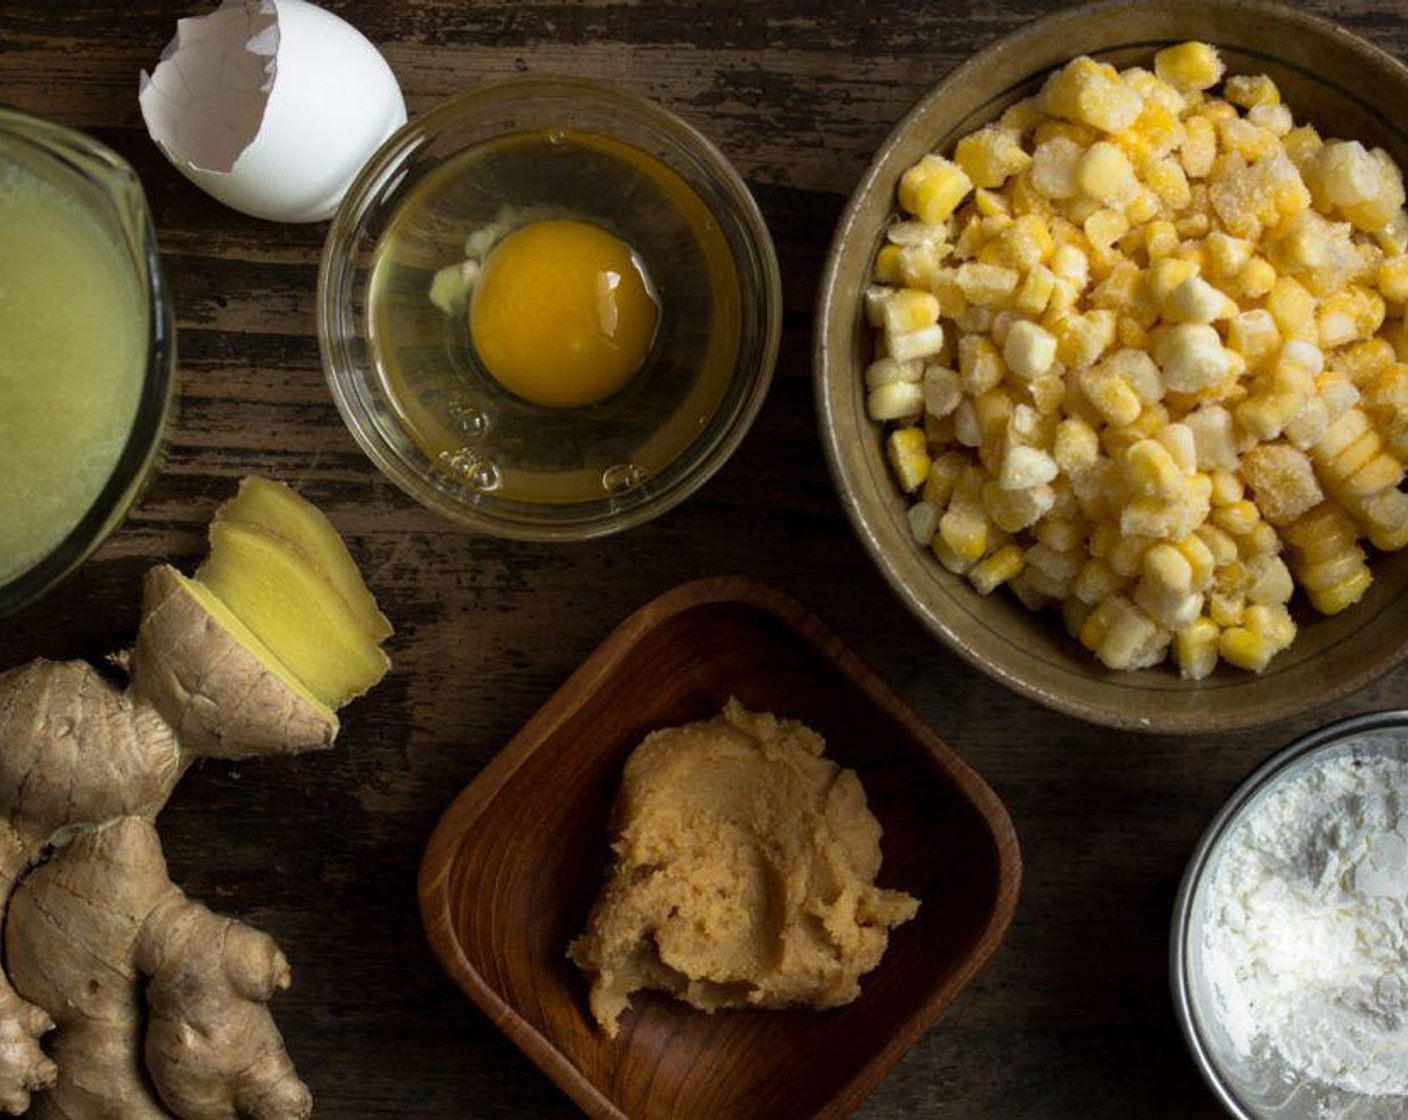 step 1 In a small pot, add the Fresh Ginger (2 slices), Miso Paste (2 1/2 Tbsp), Low-Sodium Chicken Broth (4 cups), Salt (to taste), and Frozen Corn Kernels (2 cups) and set the stove to medium heat and let it simmer for 10-15 minutes.